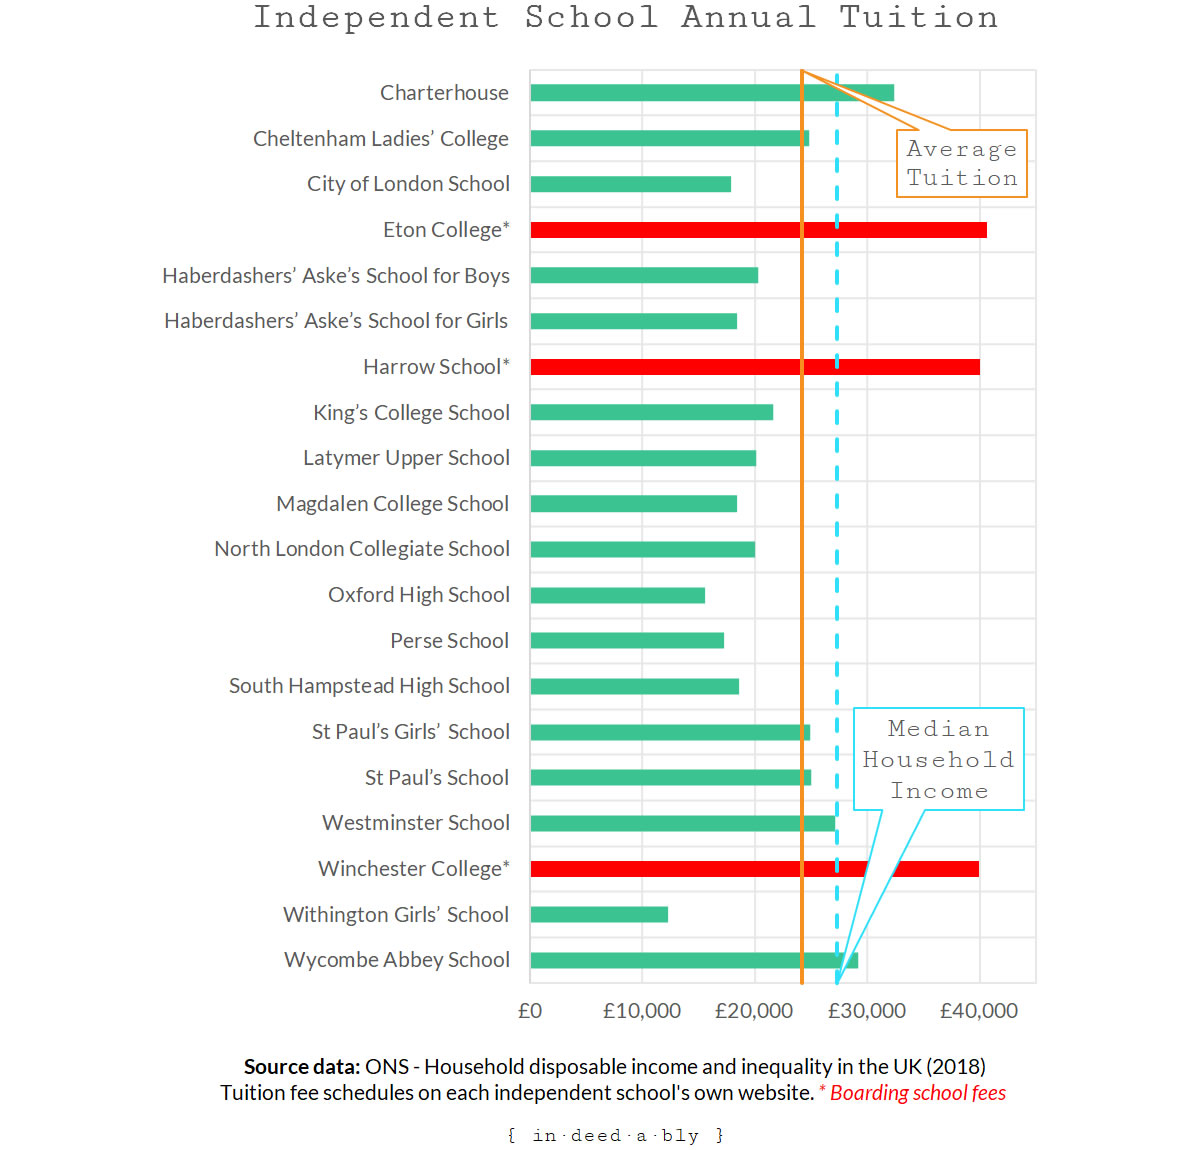 Independent school tuition fees 2018.